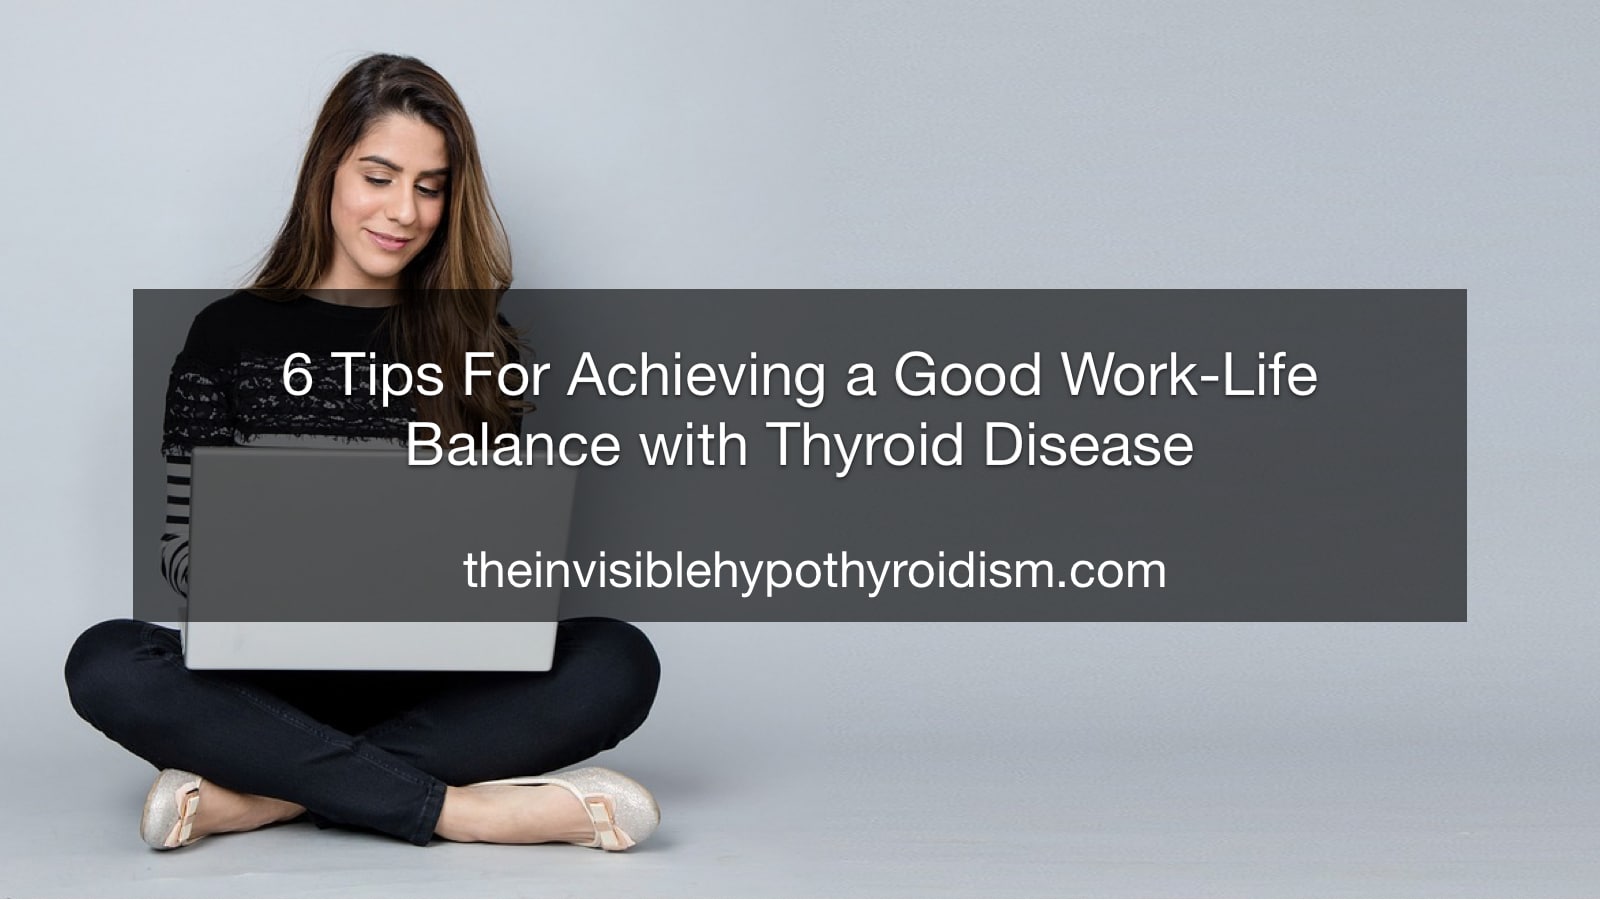 6 Tips For Achieving a Good Work-Life Balance with Thyroid Disease